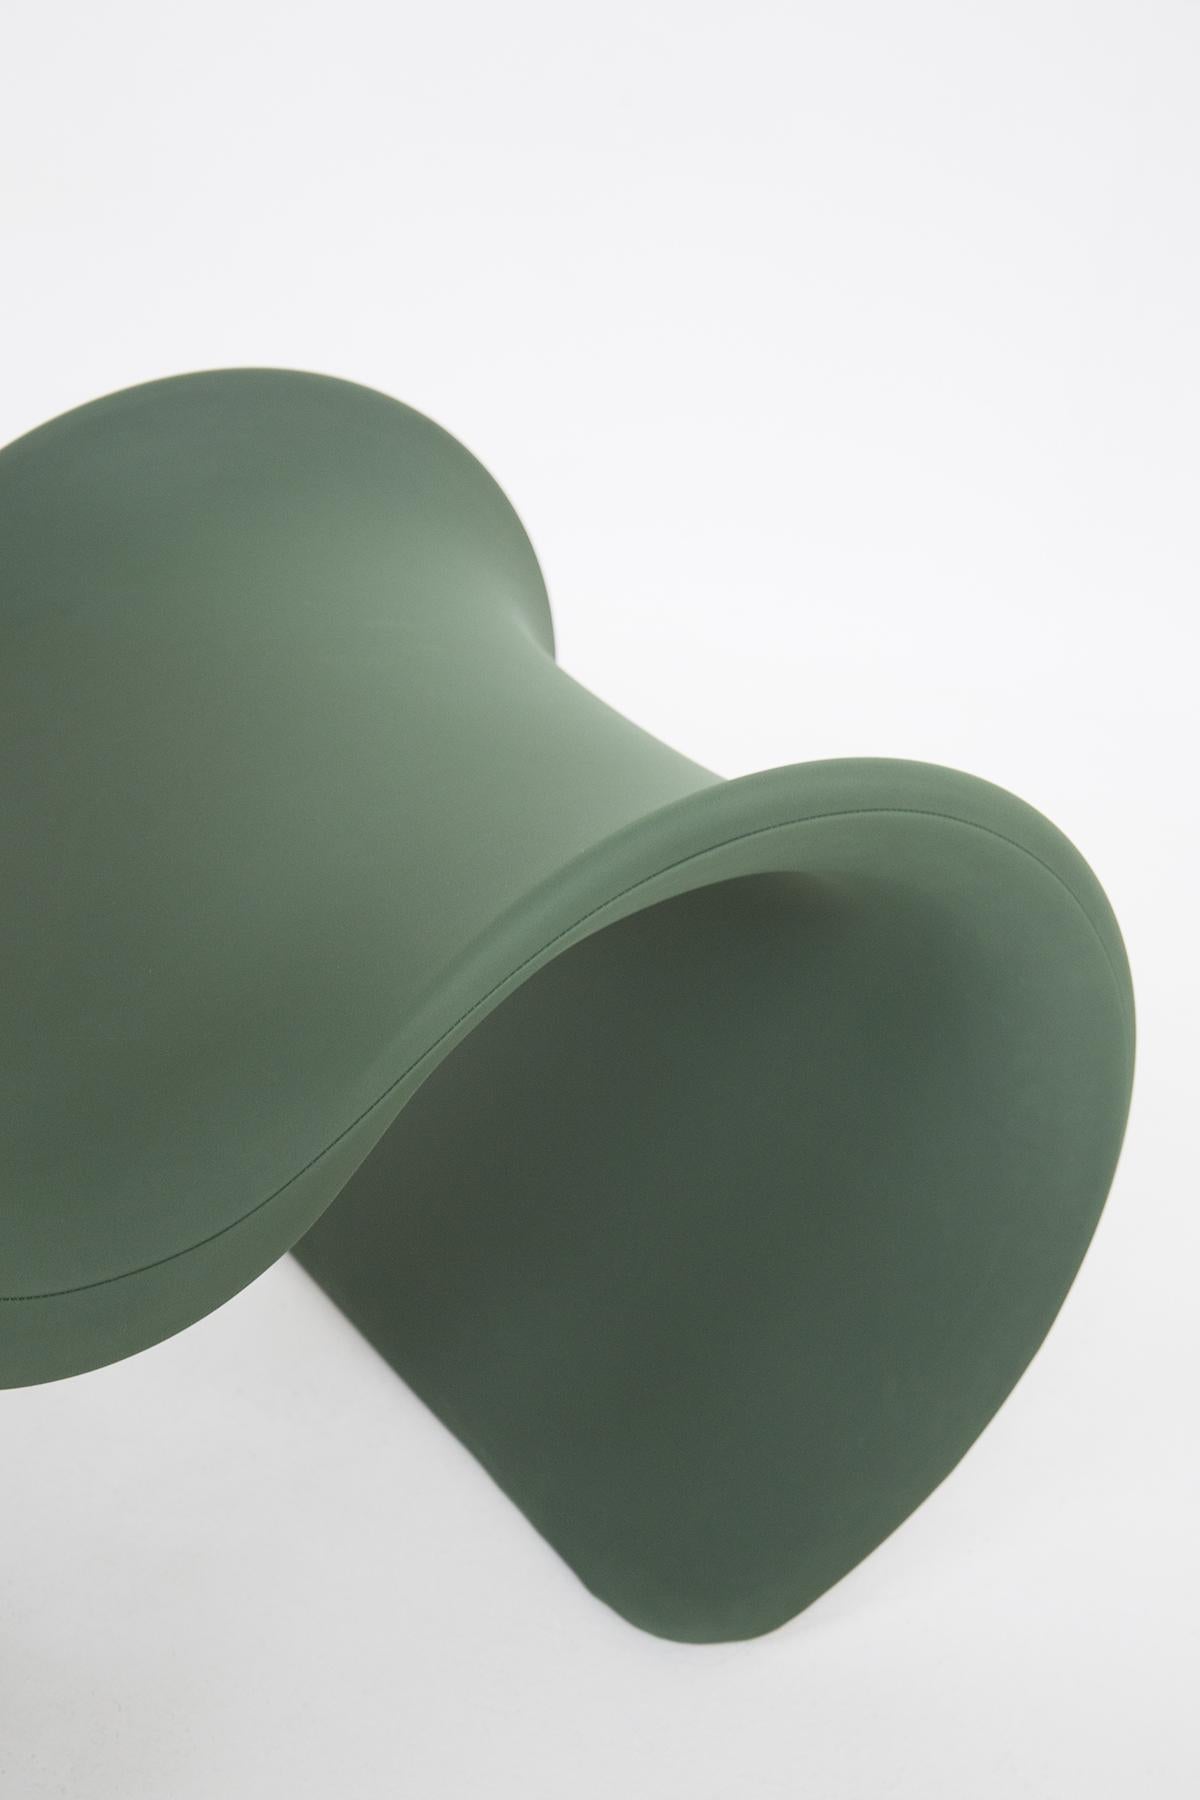 Italian Fiocco Armchair in Dark Green by Gianni Pareschi for Busnelli For Sale